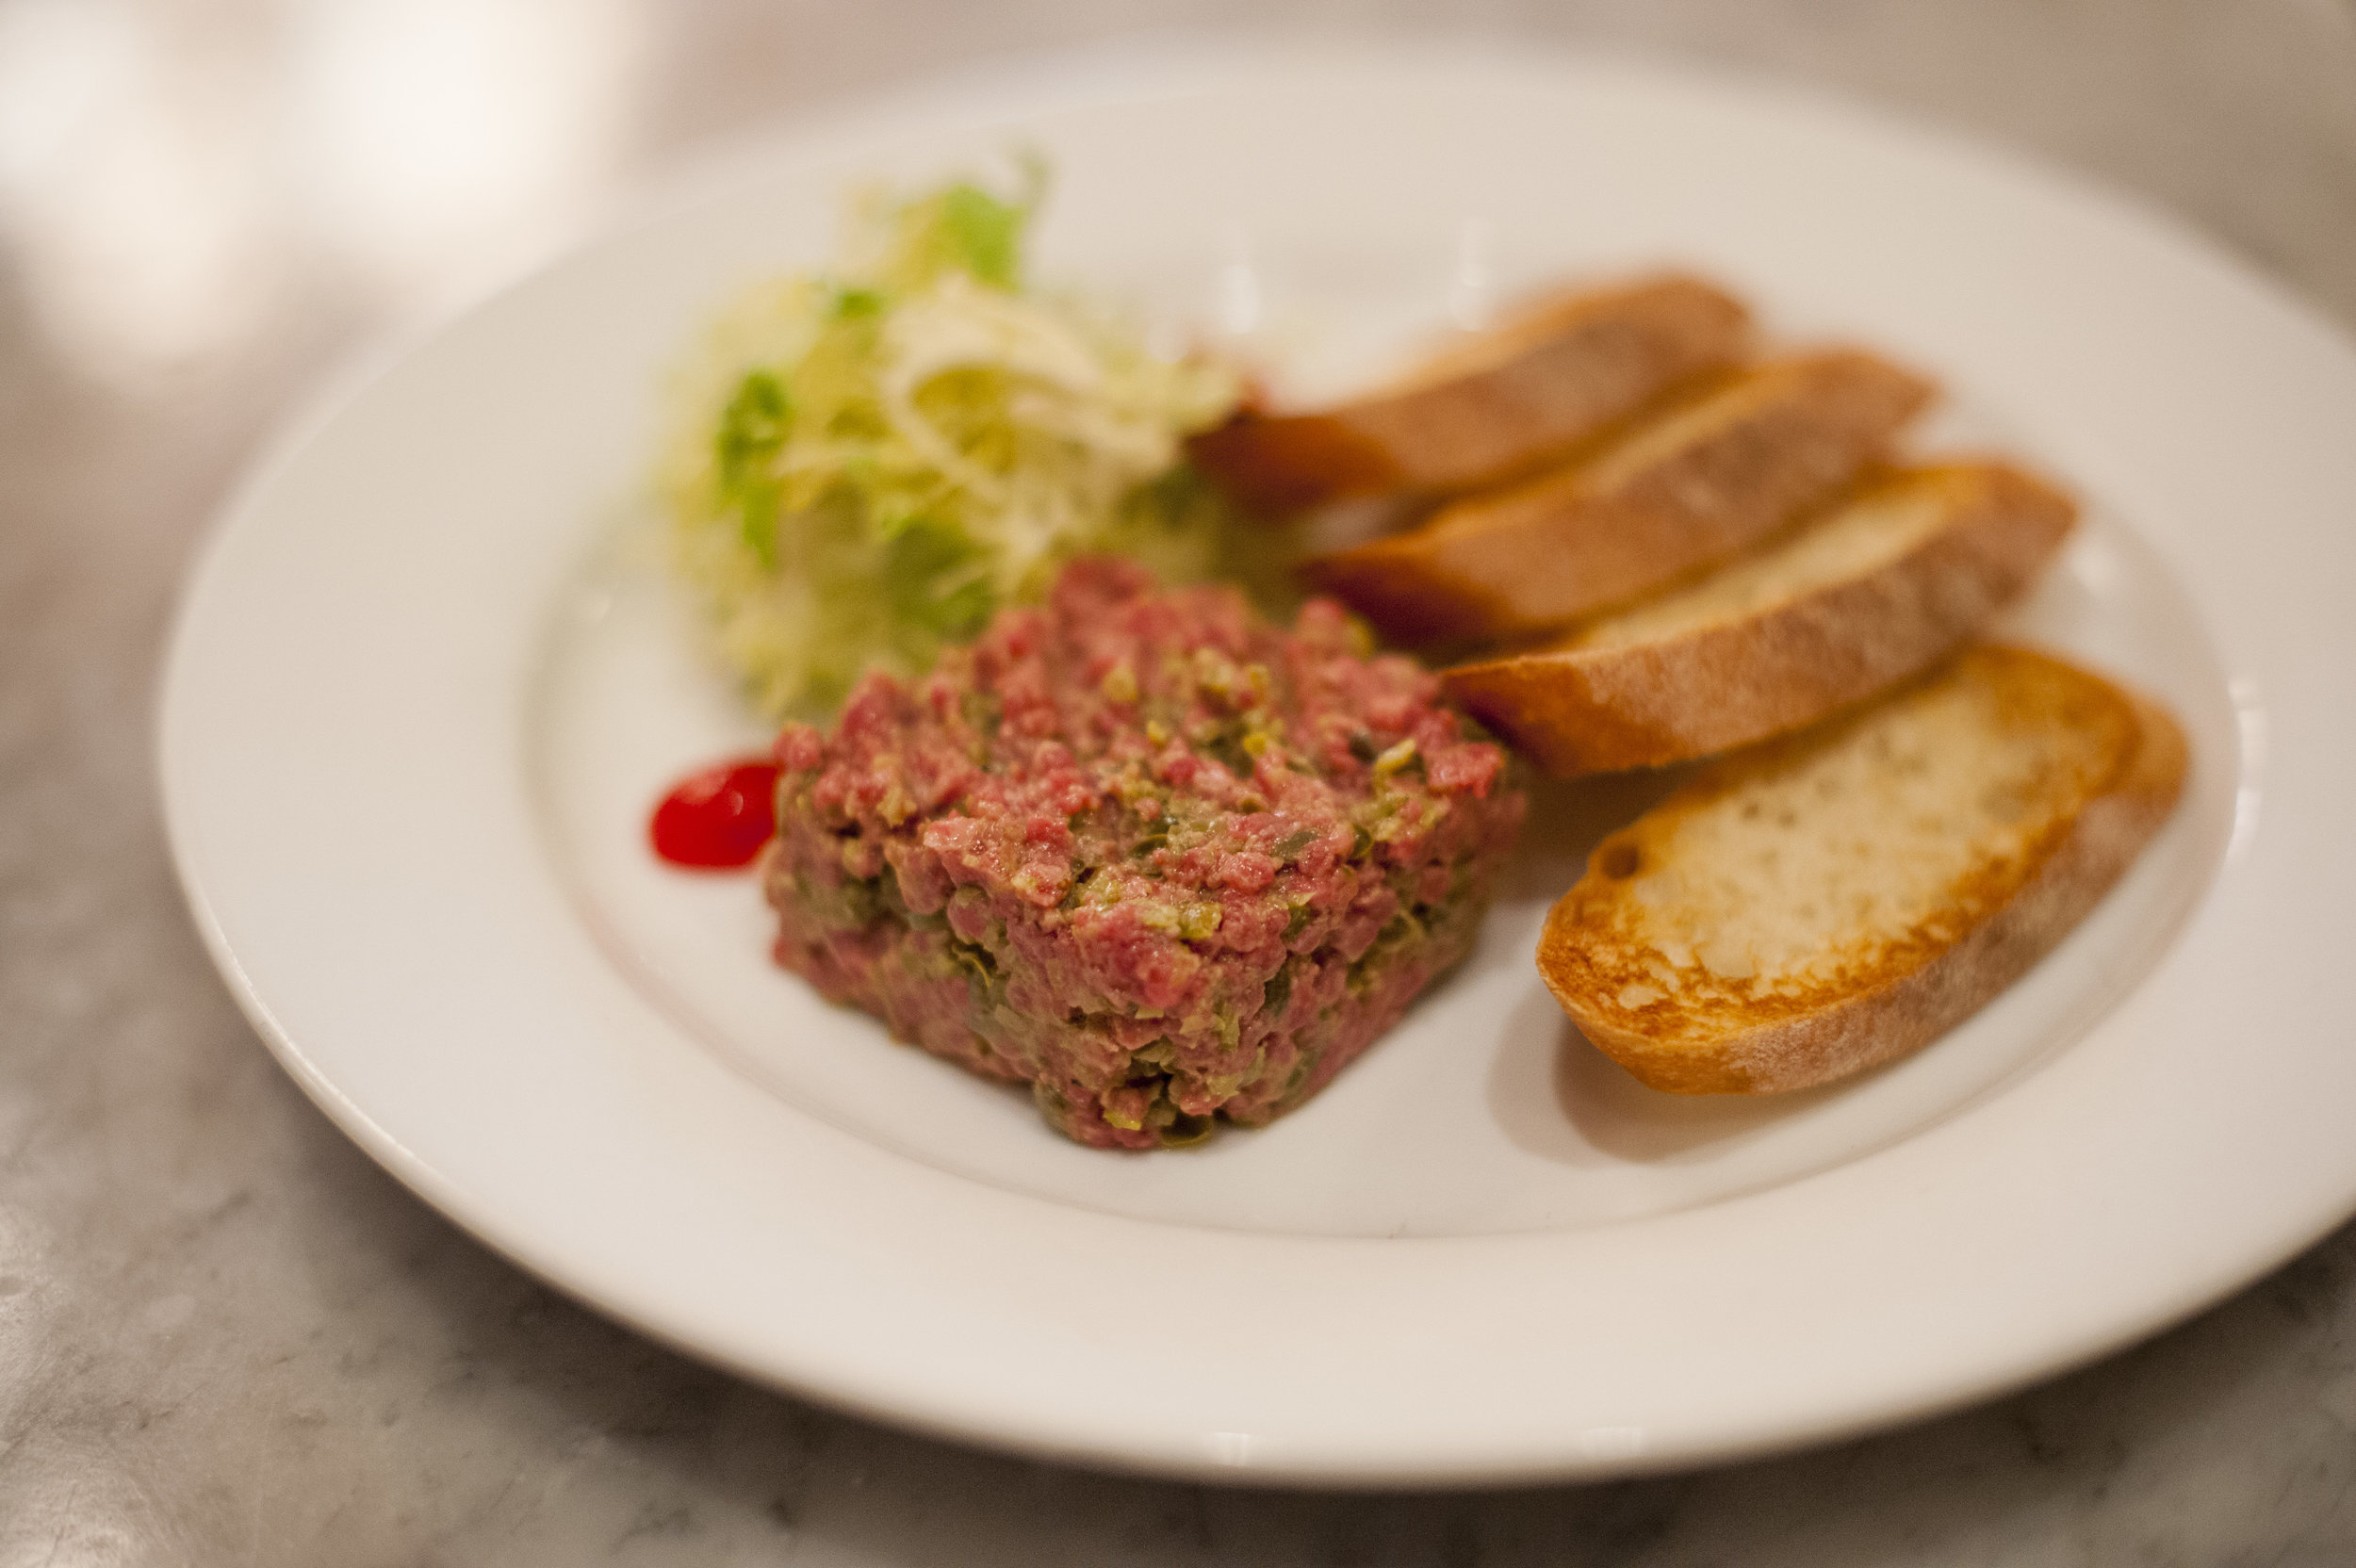  Steak Tartare brings together succulent raw beef mixed with capers, dijon mustard with toasted baguette slices and frisee salad. 